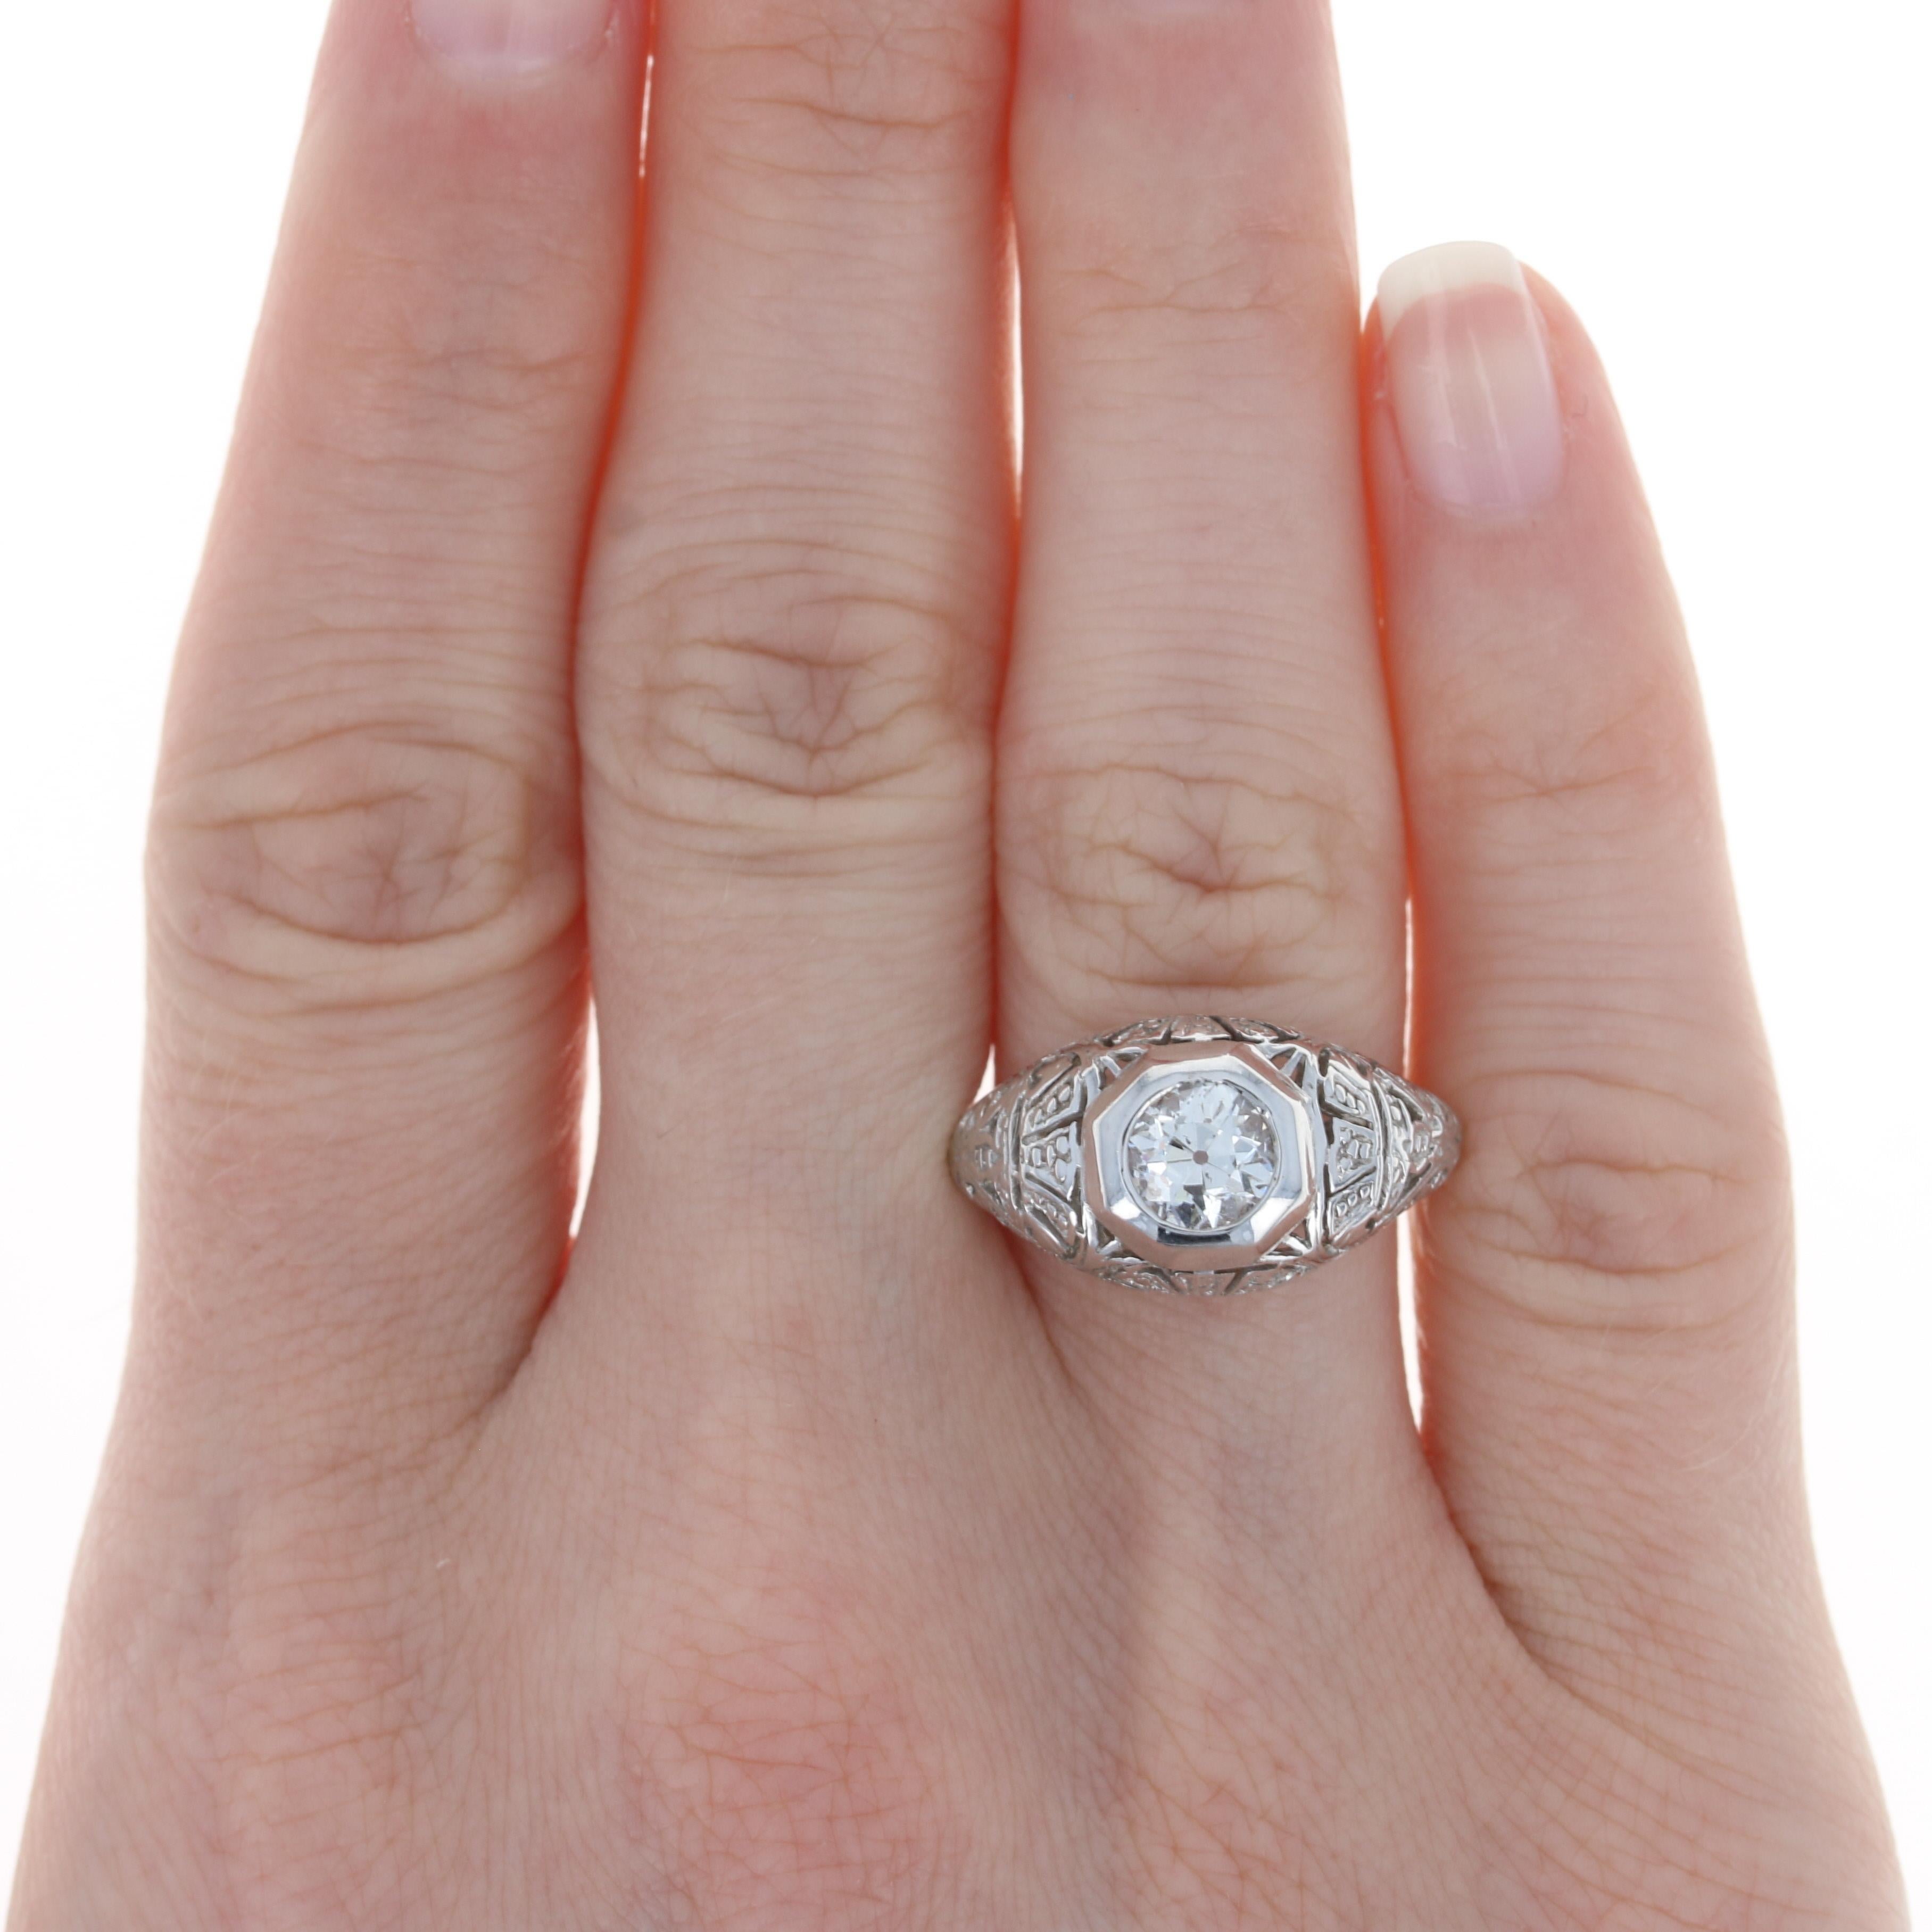 The essence of elegance! Created in 18k white gold, this vintage engagement ring features a natural diamond solitaire. The Old Mine Cut diamond is set in an eight-sided bezel and ported from the underside for enhanced brilliance and sparkle. A